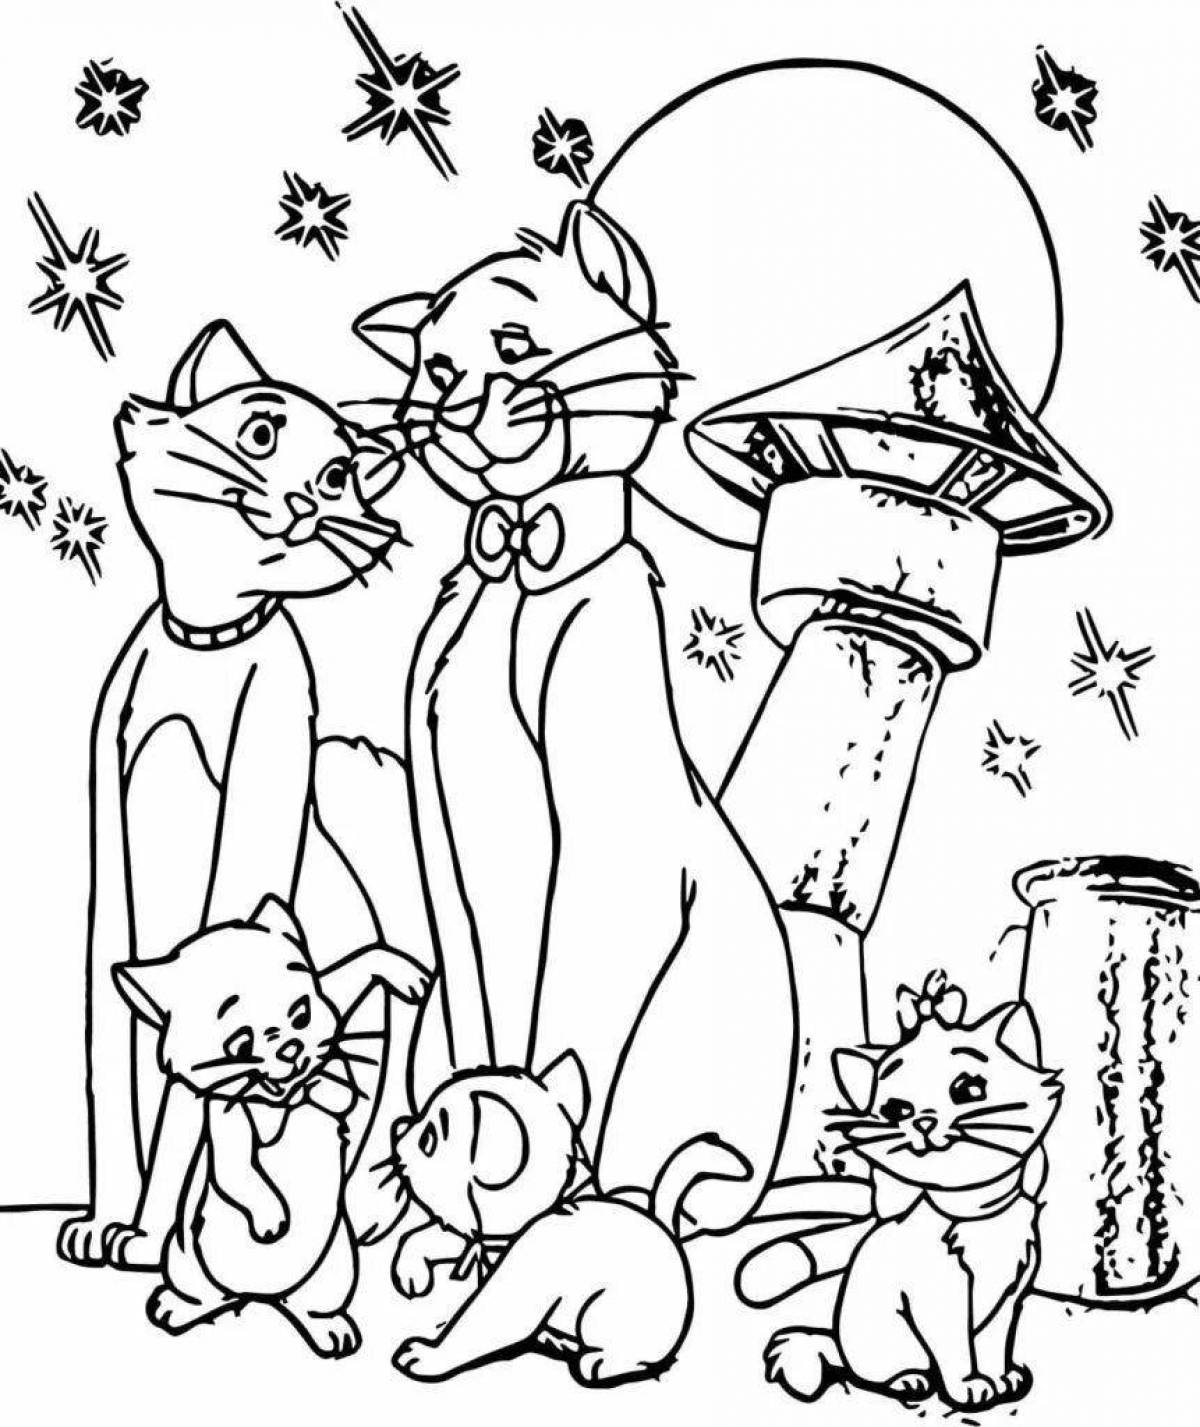 Fancy cat family coloring page